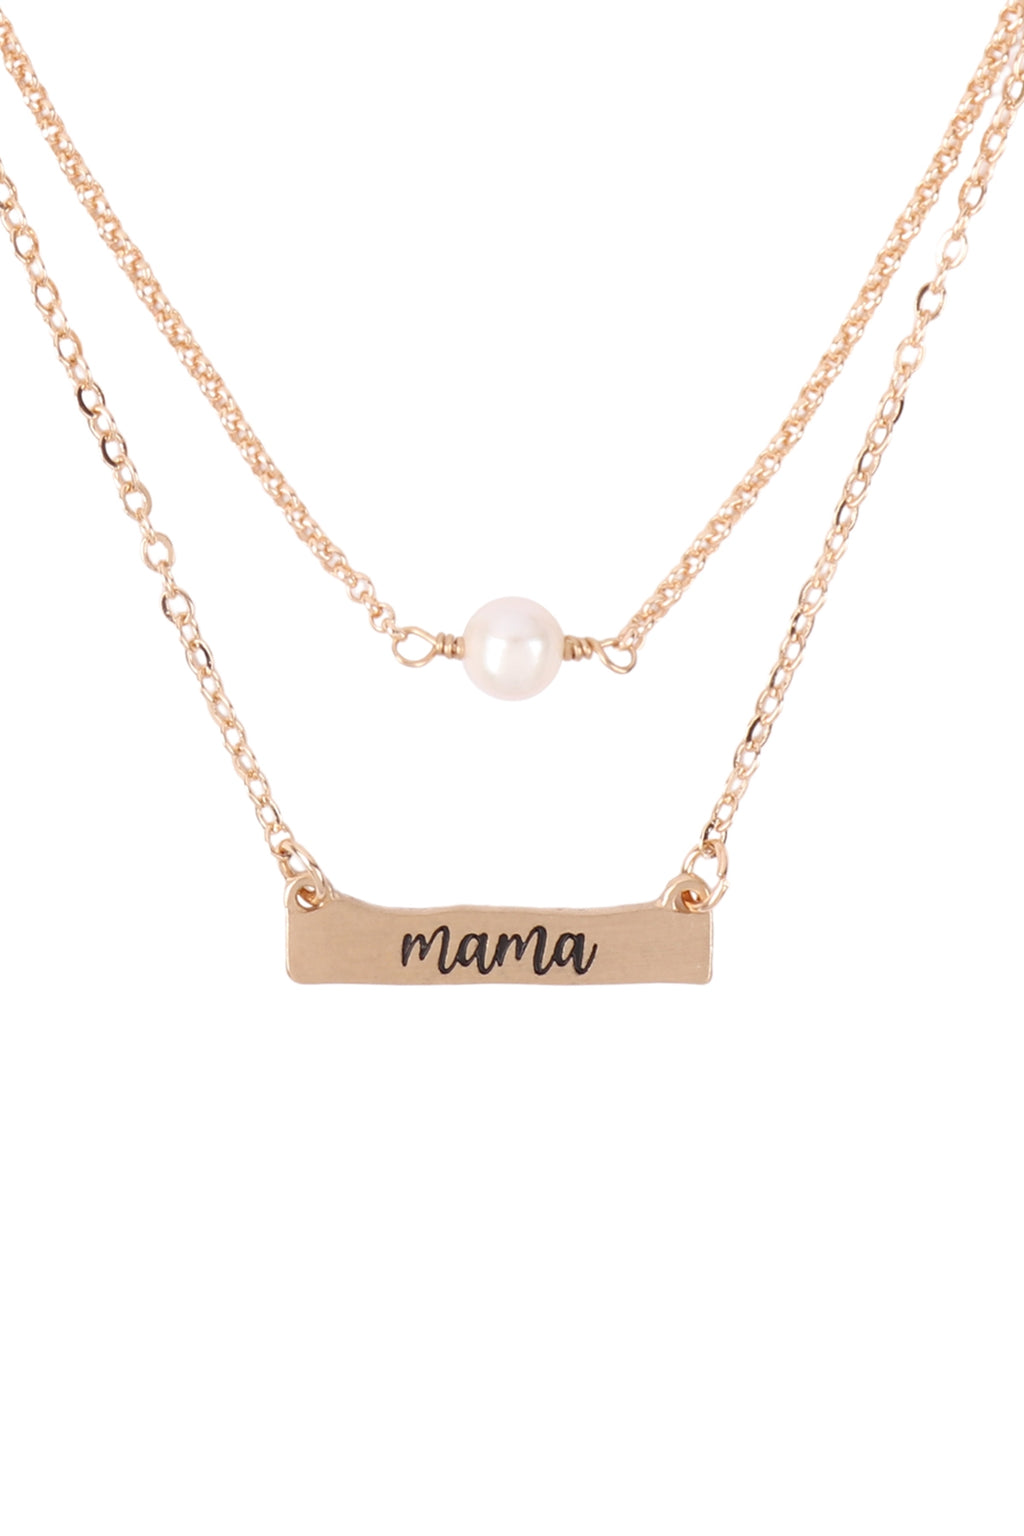 "Mama" Inspirational Pearl 3 Set Necklace Matte Gold - Pack of 6